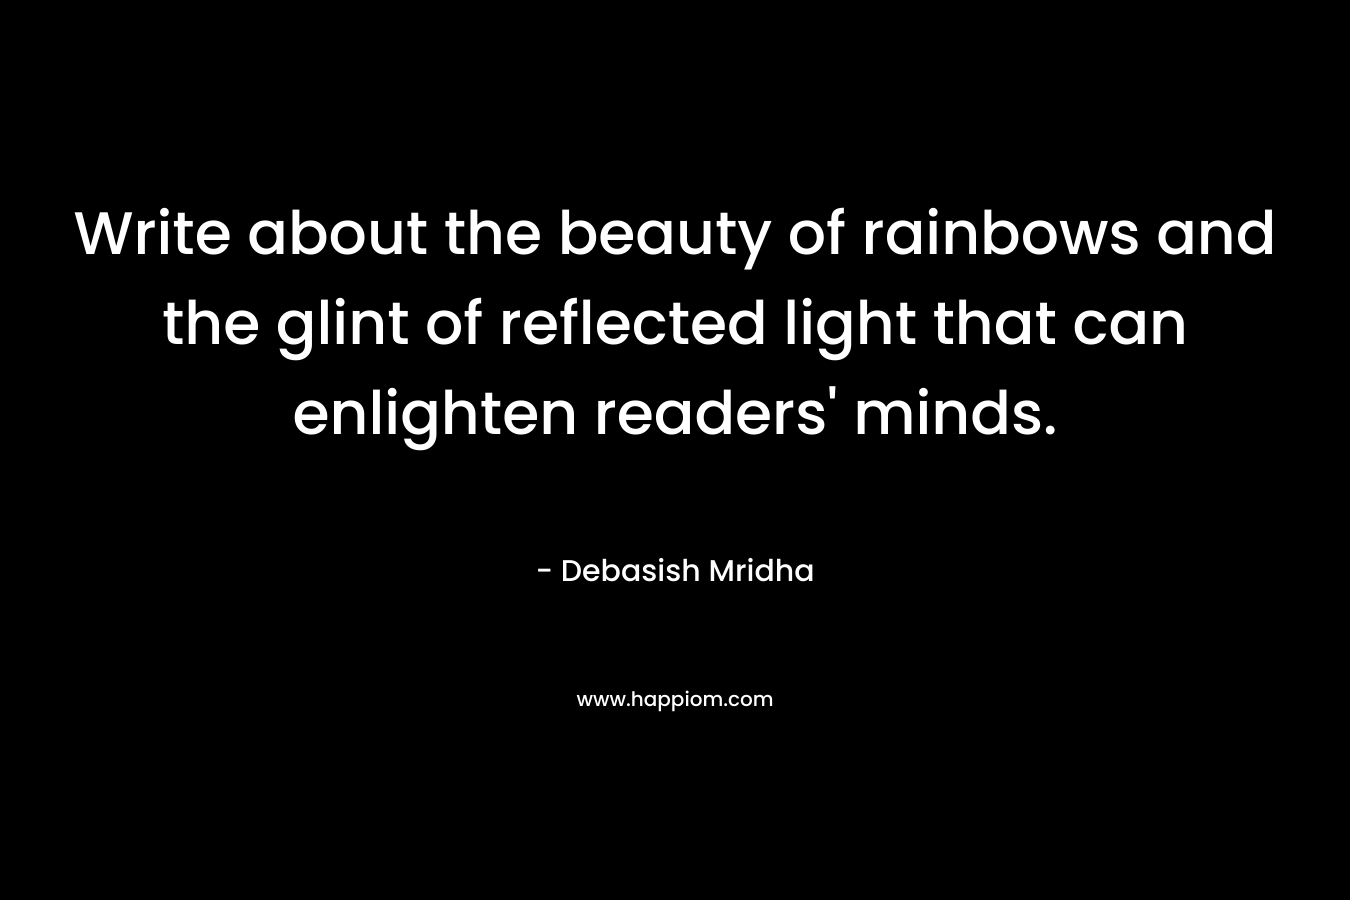 Write about the beauty of rainbows and the glint of reflected light that can enlighten readers’ minds. – Debasish Mridha